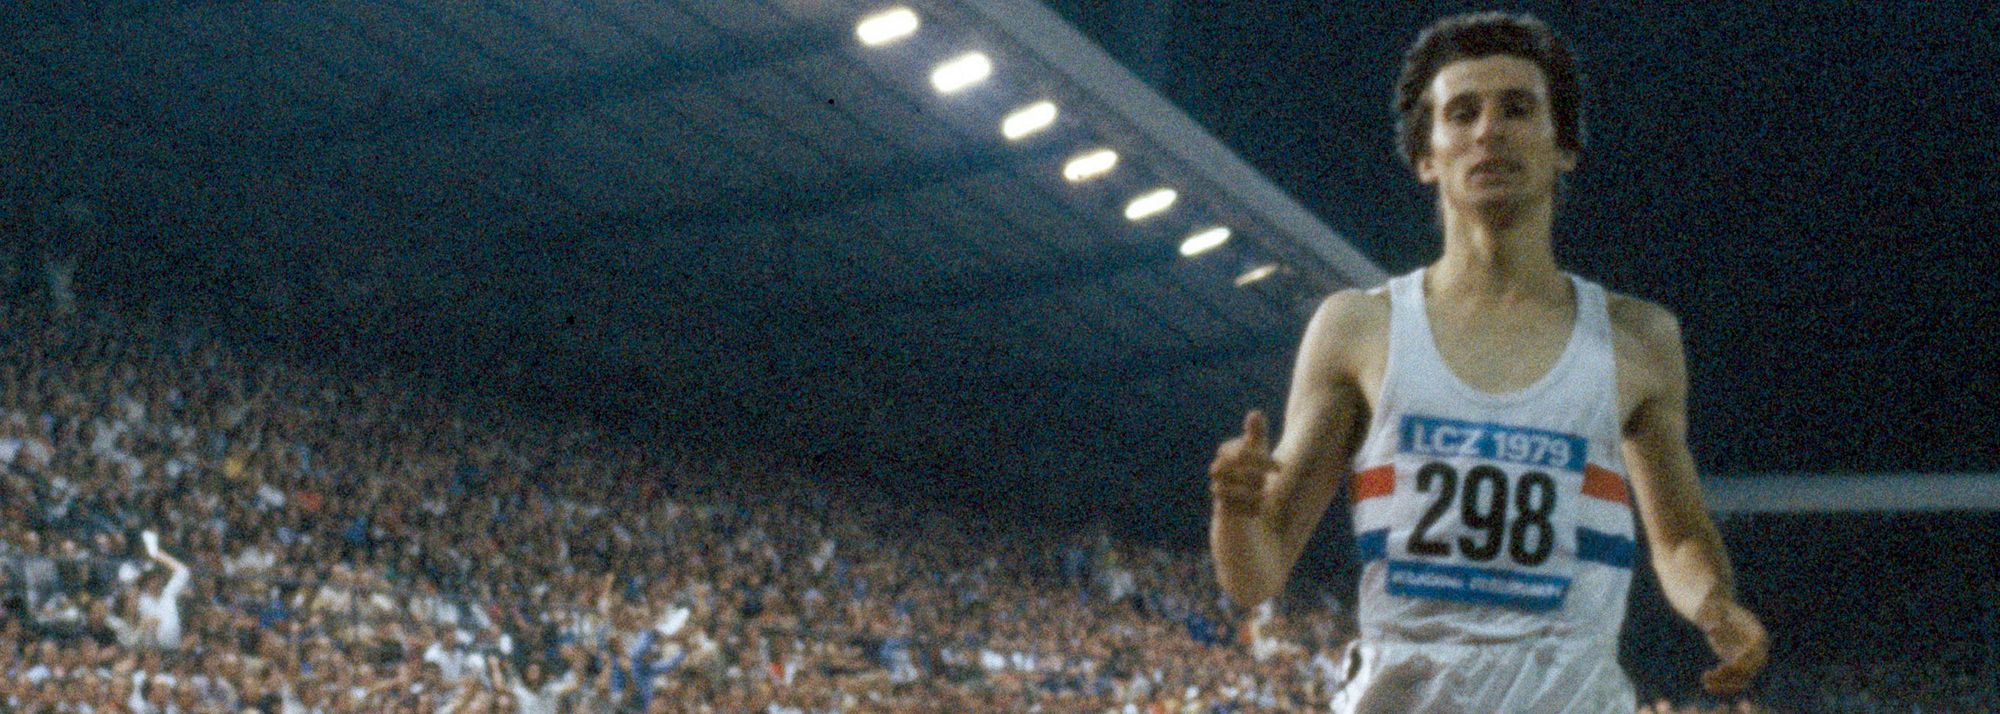 On 15 August 1979, Sebastian Coe set a world record over 1500m at Zurich’s fabled Weltklasse meeting.